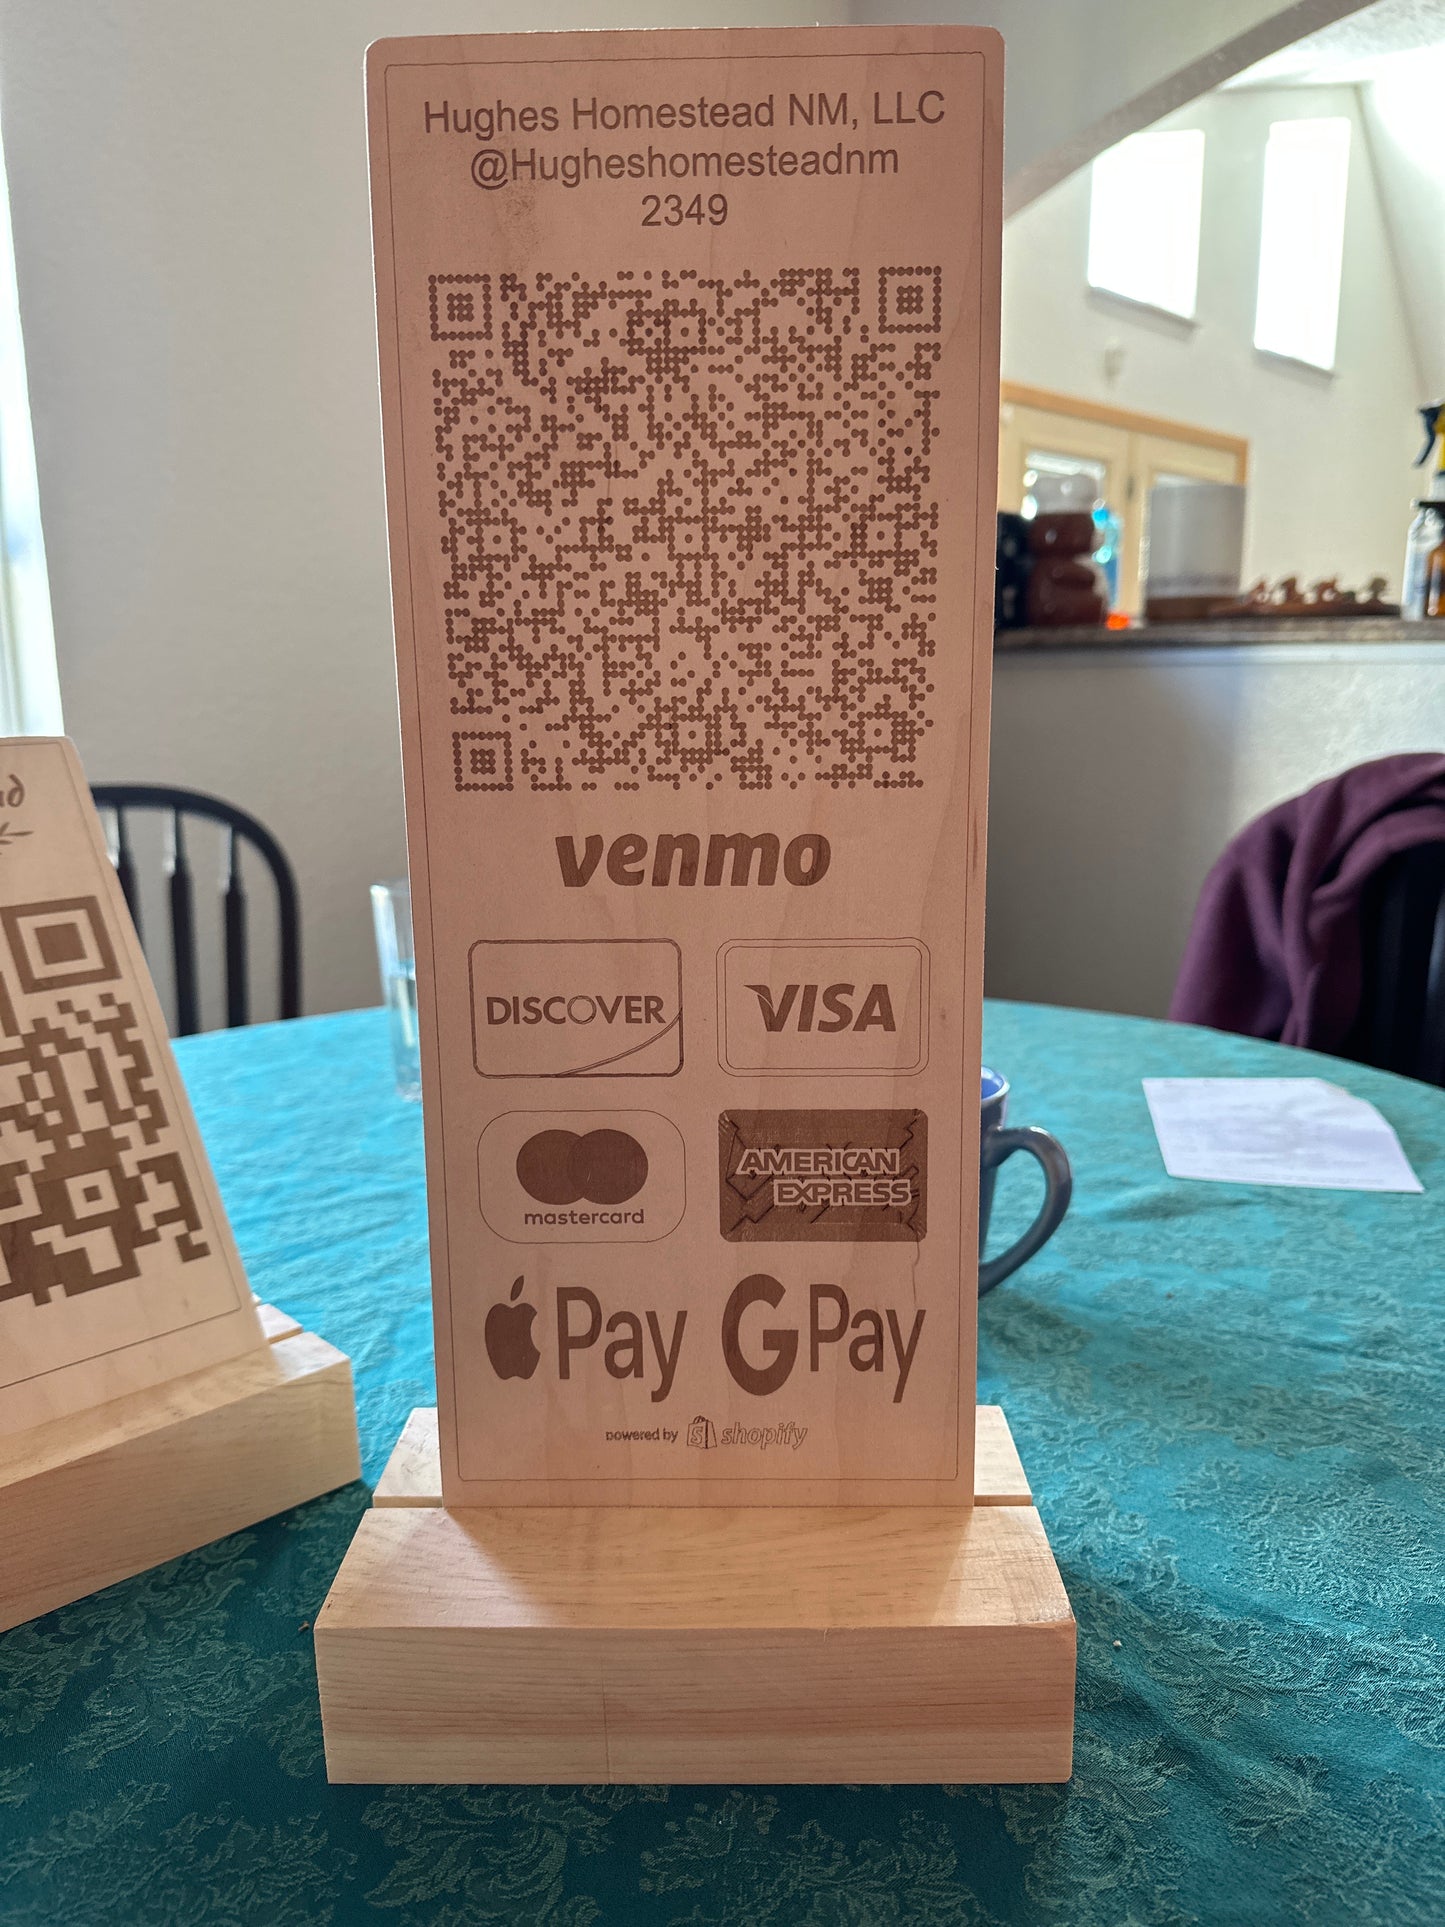 Payment Sign